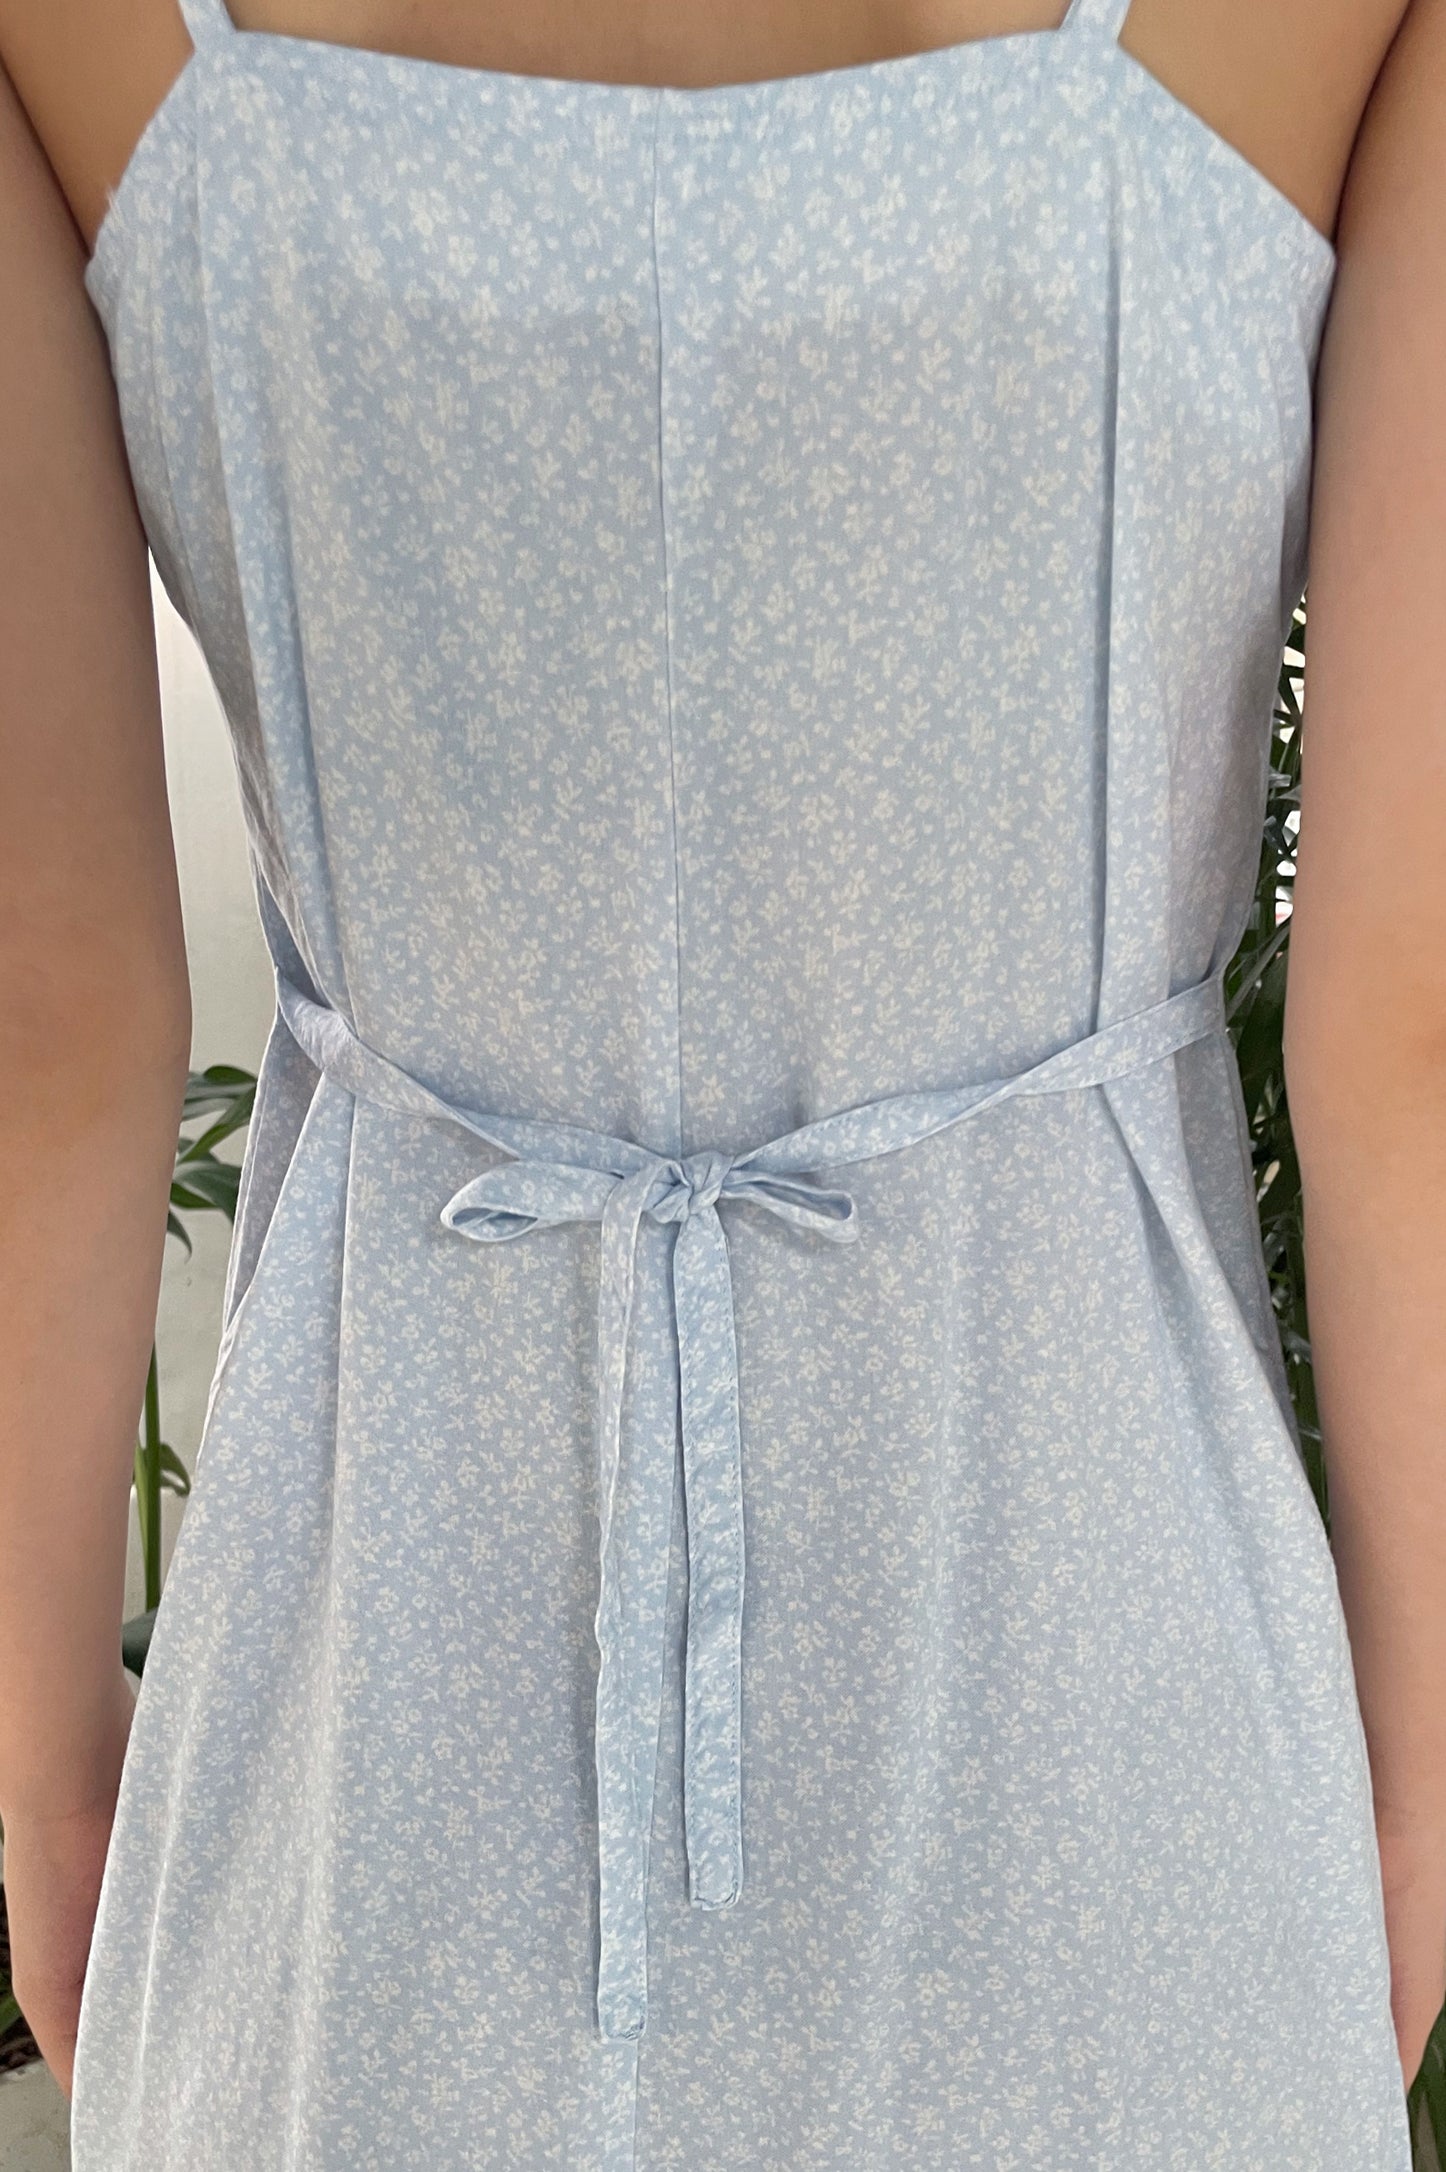 Brandy Melville Colleen Tank Dress Pink - $85 - From Chels